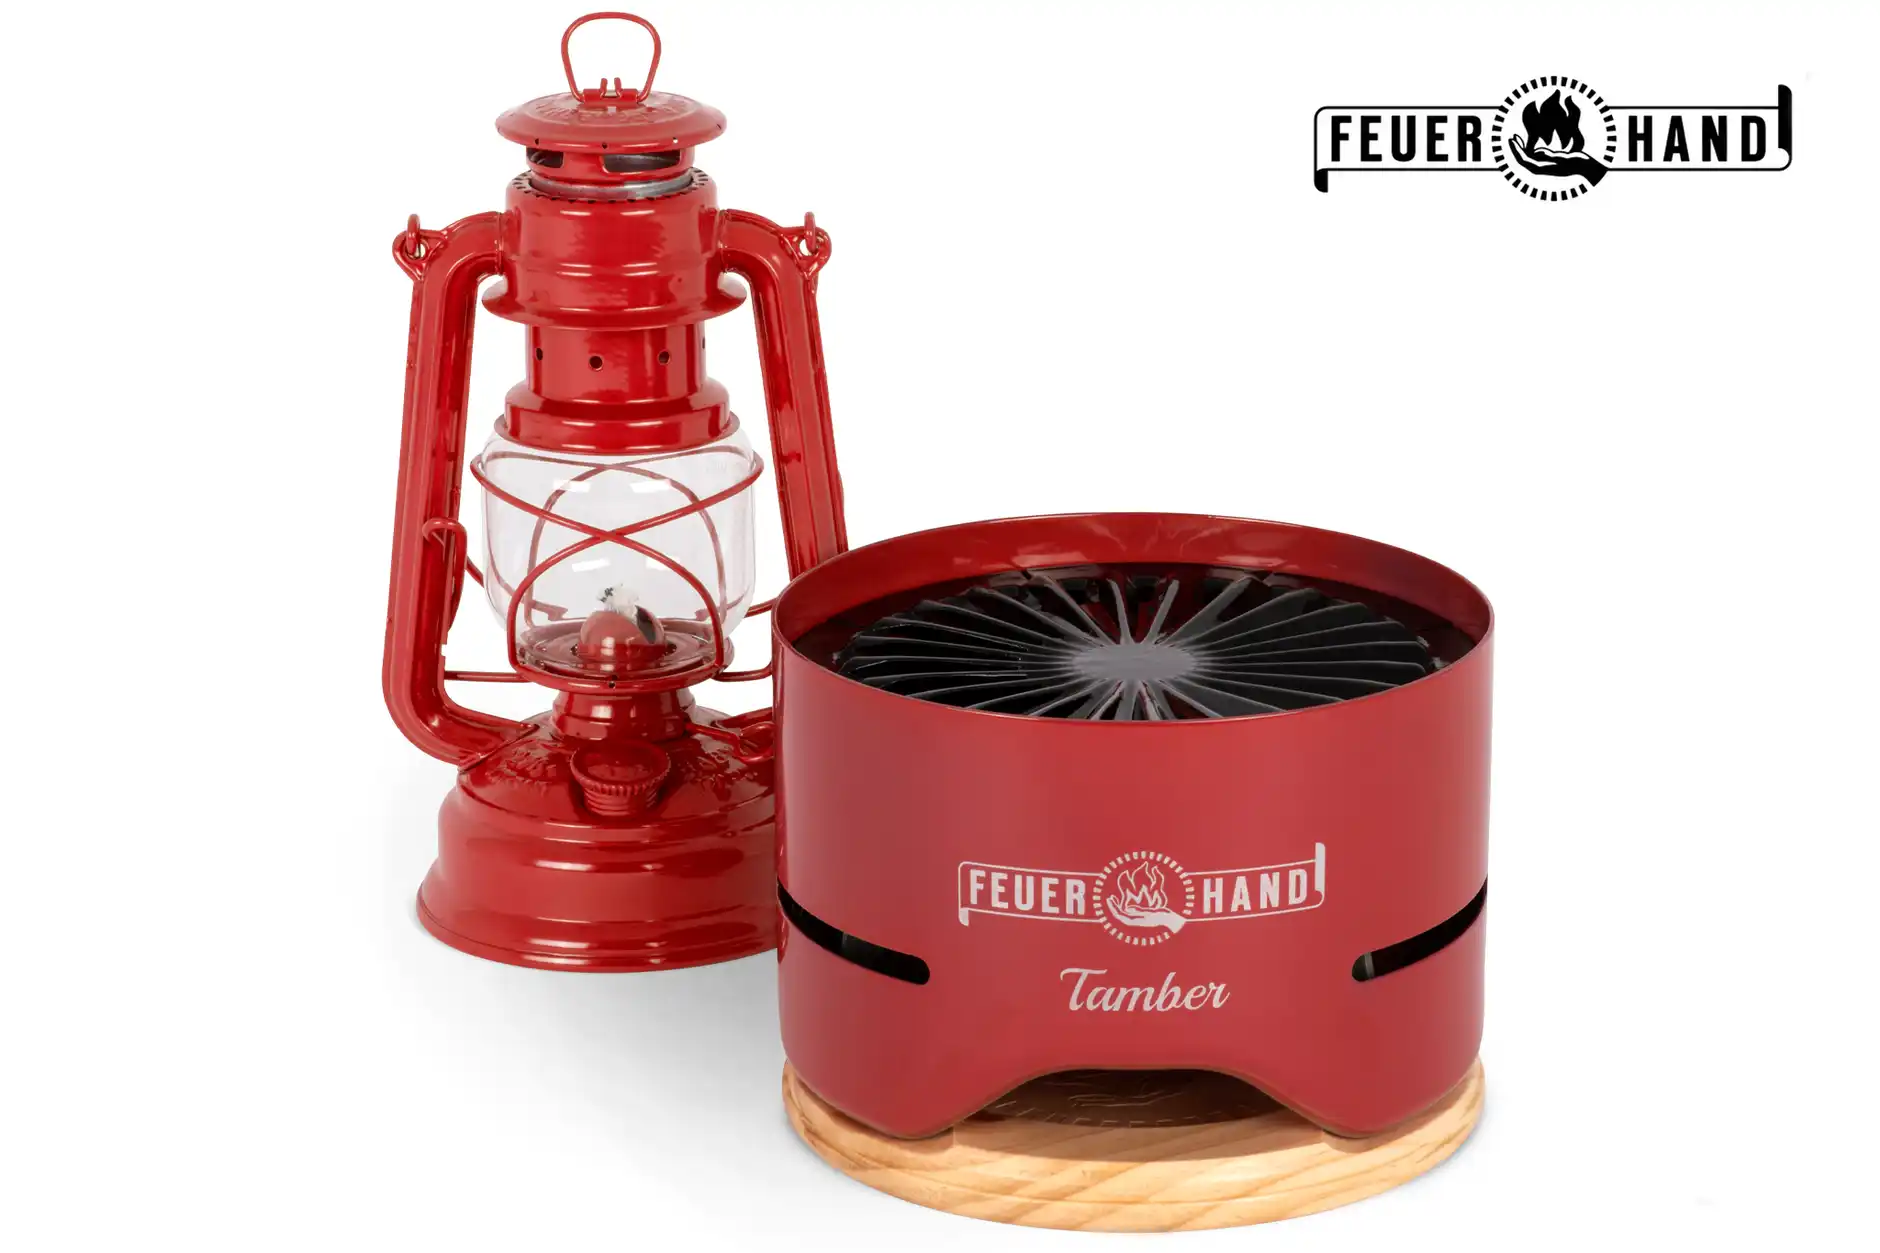 Image for Win a Table Top Grill and Hurricane Lantern from Feuerhand